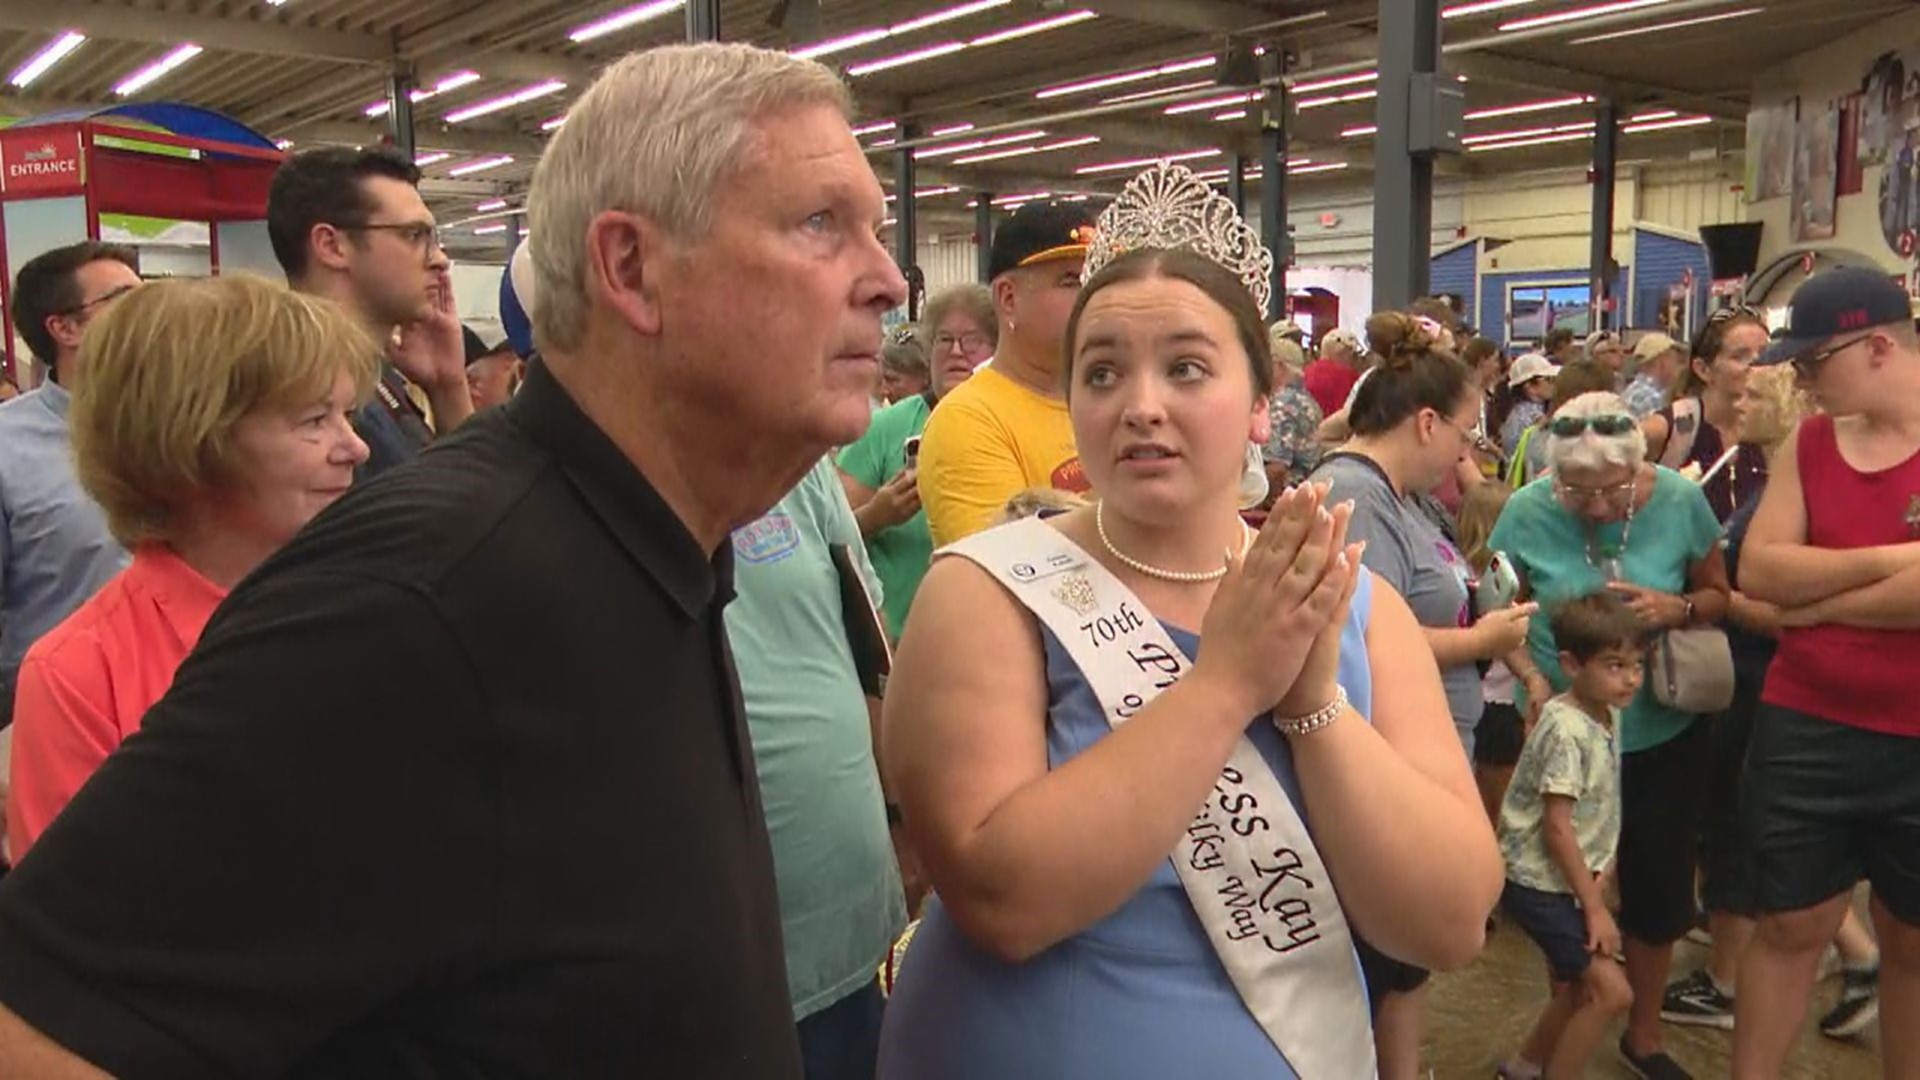 US Agriculture Secretary Tom Vilsack visited the State Fair Monday, on the same day he announced $230 million in aid to Minnesota farmers and rural communities.